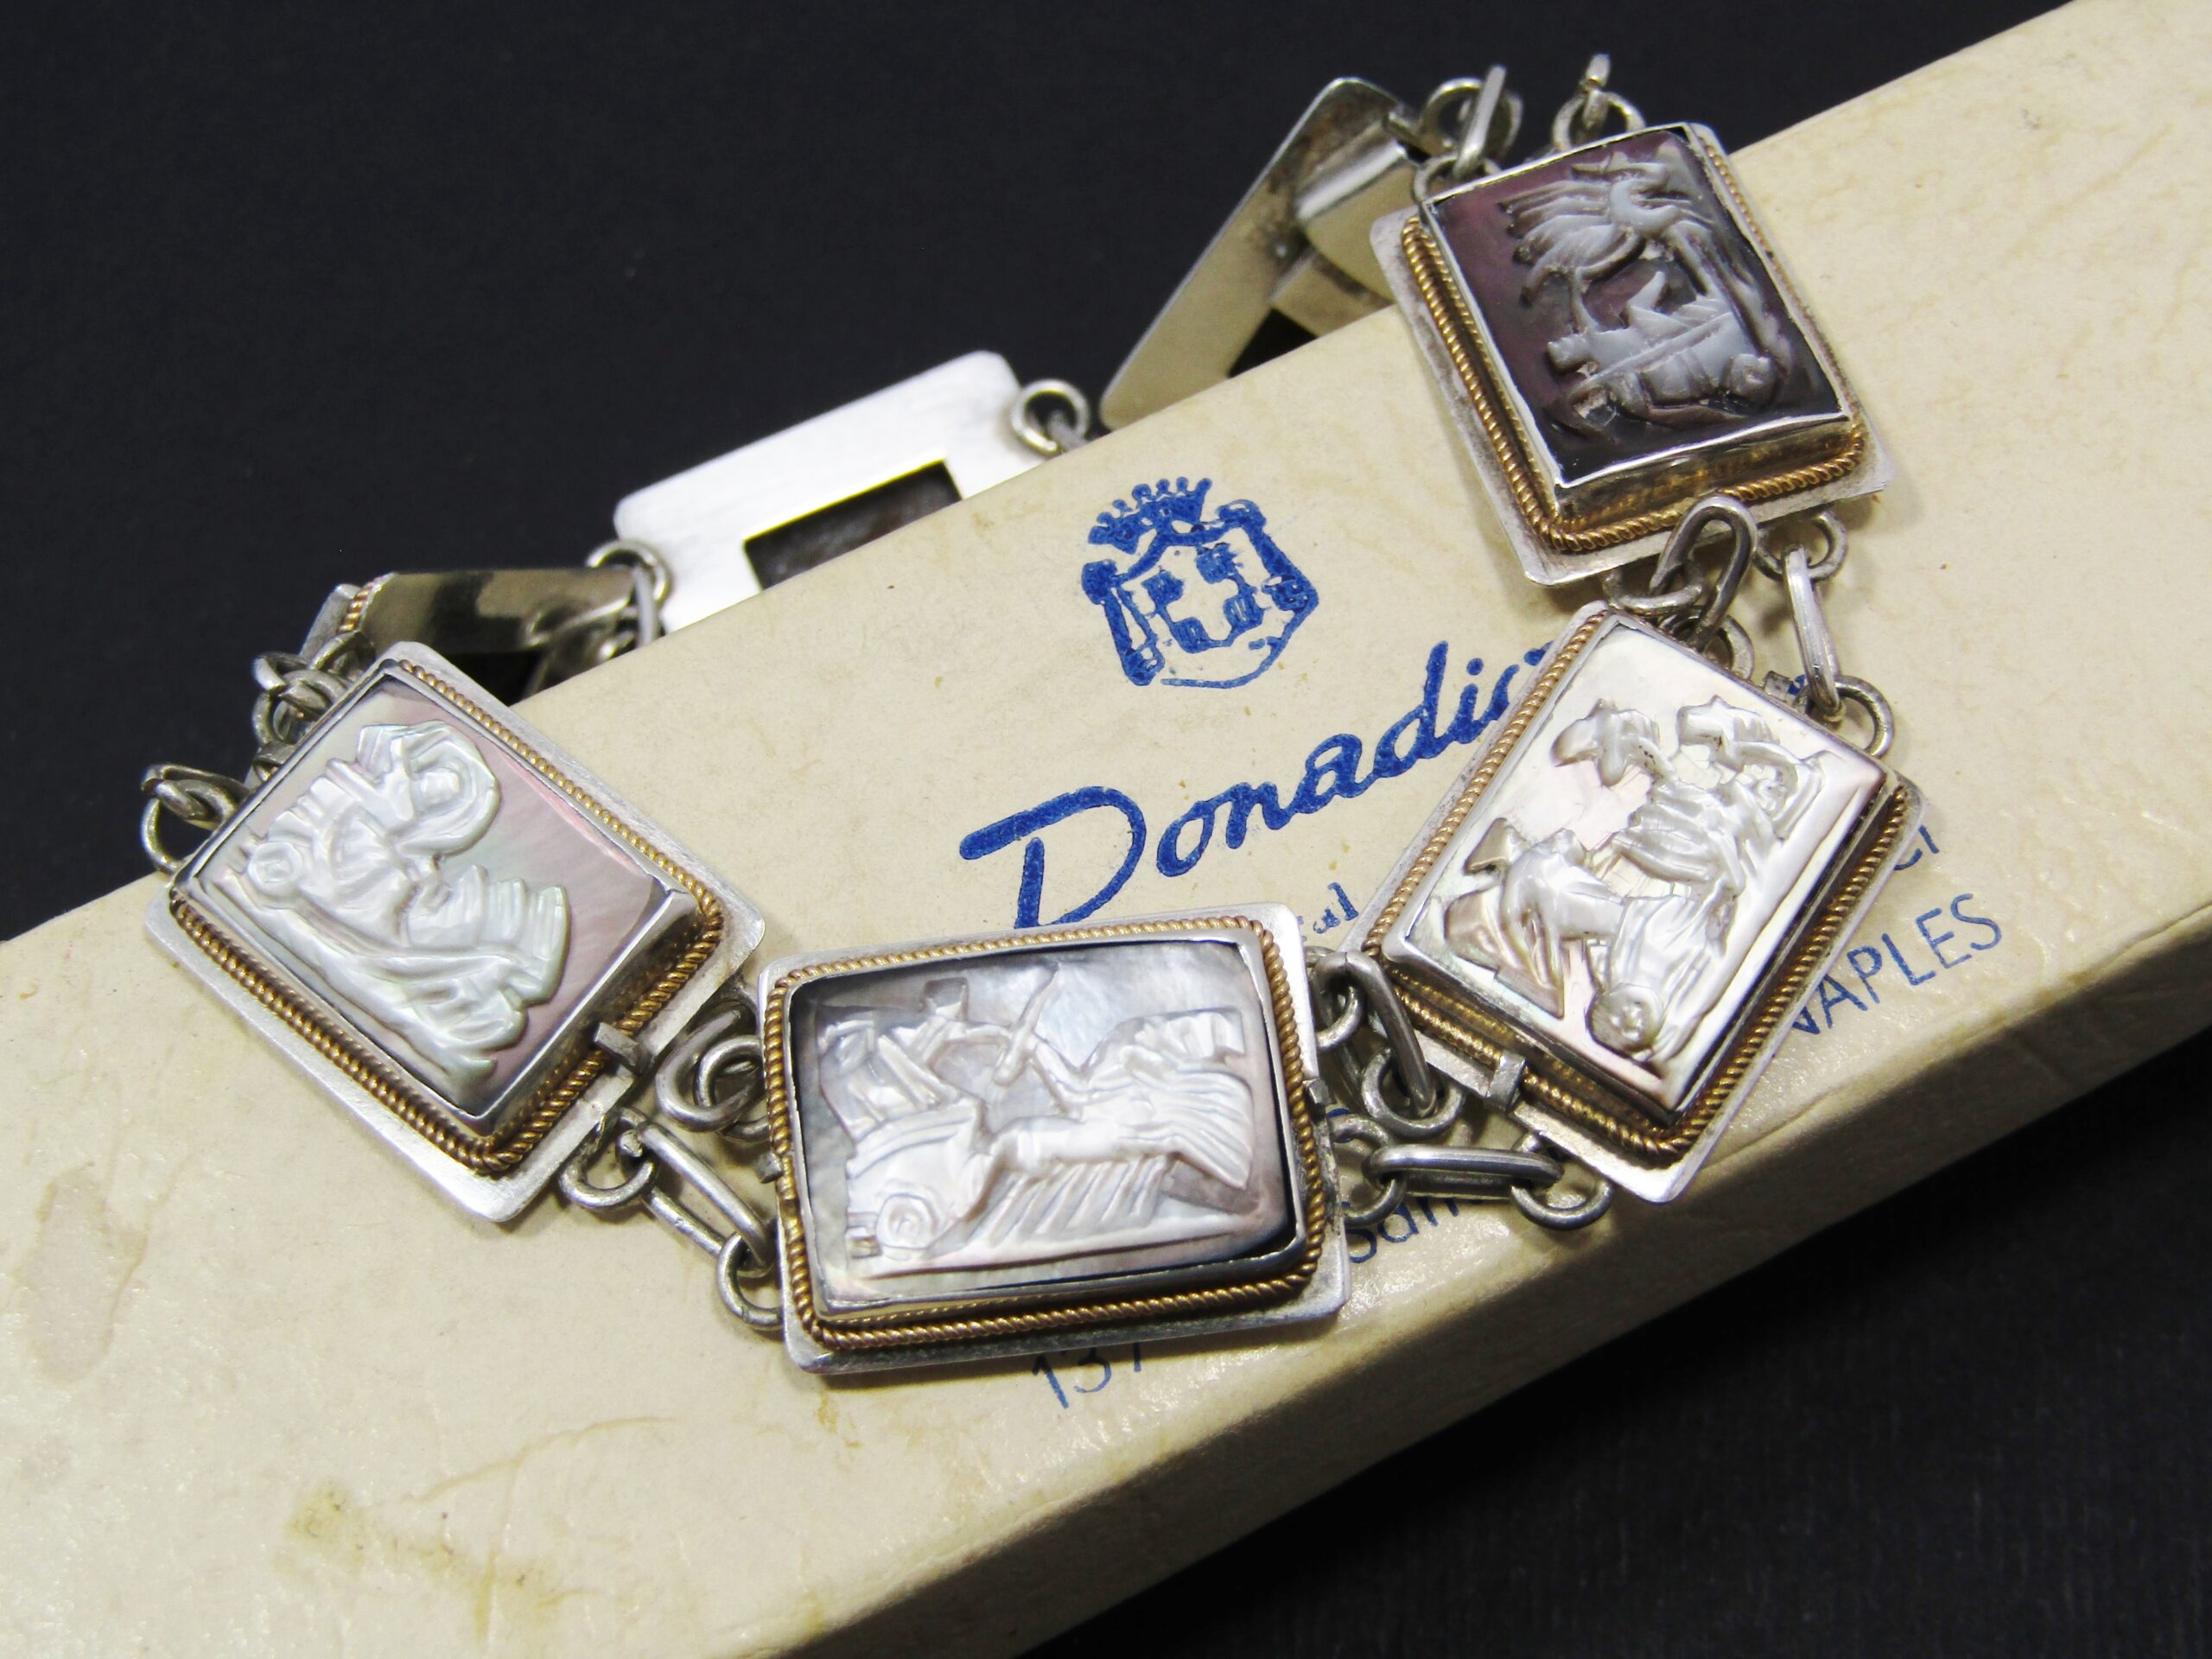 Vintage Italian Carved Mother of Pearl Cameo Bracelet